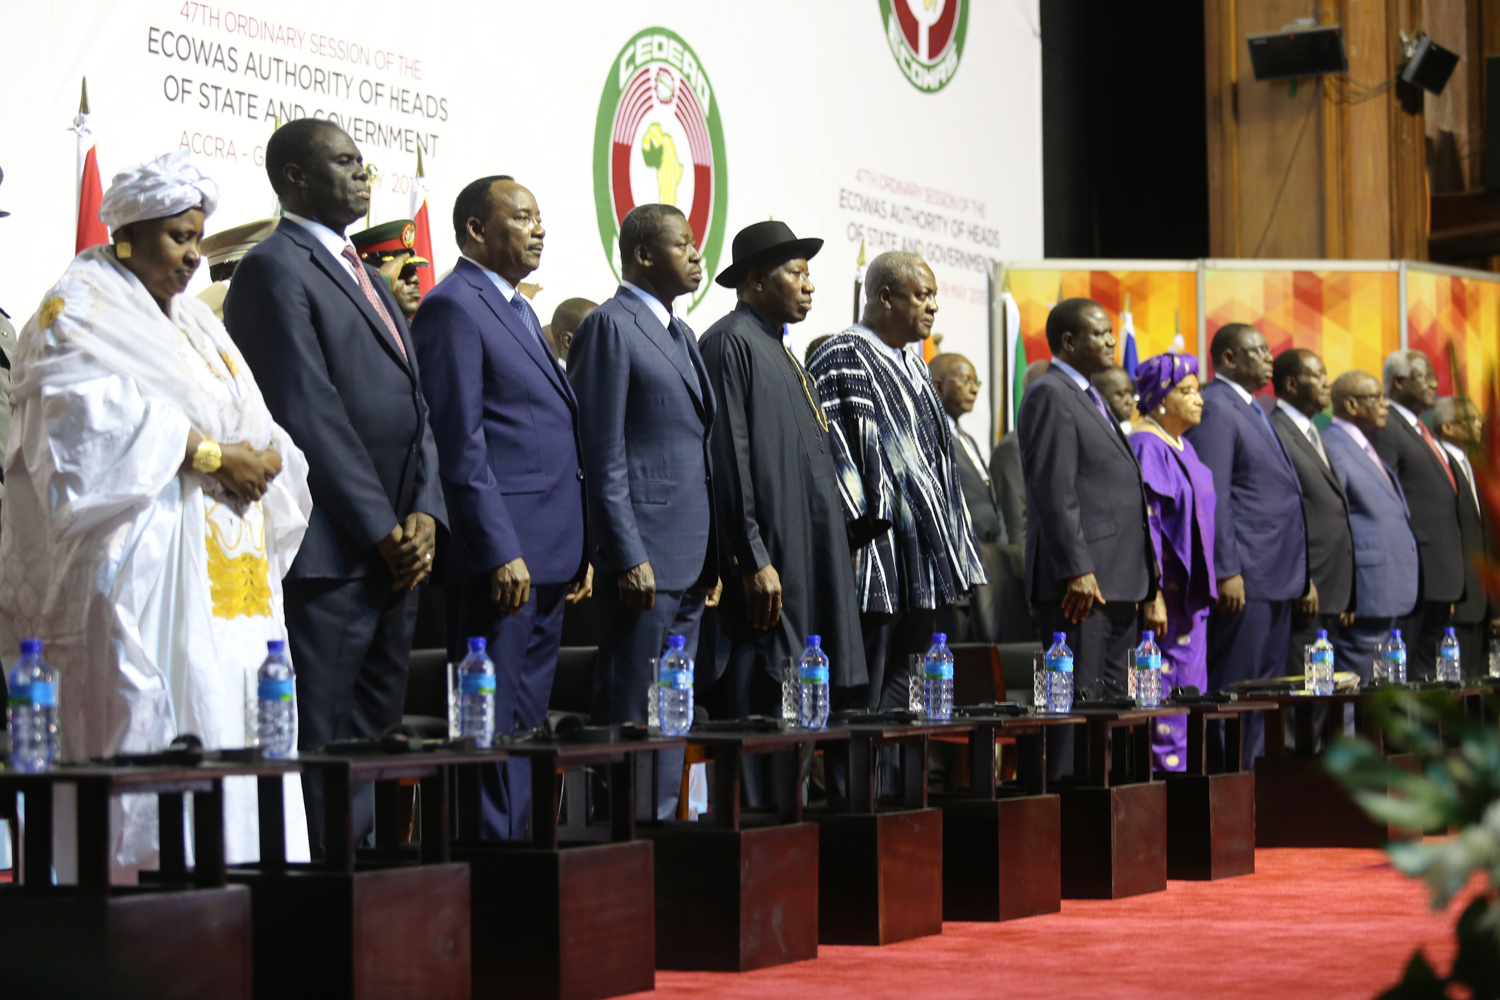 GROUP PICTURE OF THE ECOWAS HEADS OF STATE AT THE 47TH, ORDINARY SESSION OF THE ECOWAS AUTHORITY OF HEADS OF STATE AND GOVERNMENT IN ACCRA GHANA 